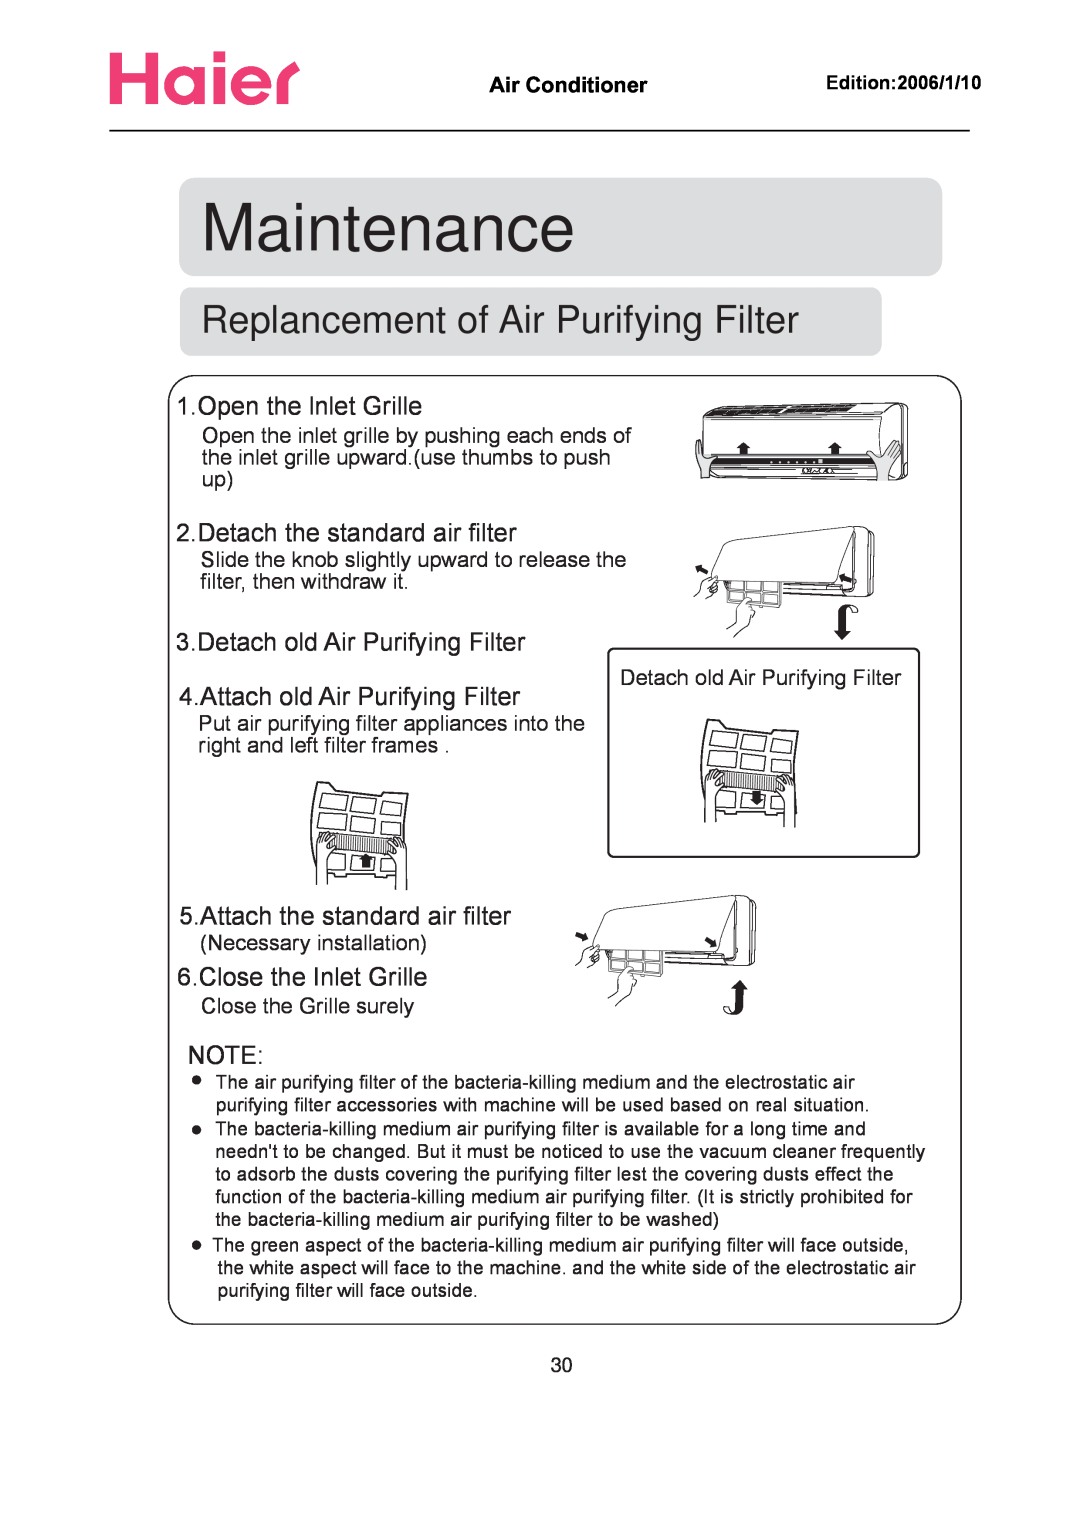 Haier Compact Air Conditioner manual Replancement of Air Purifying Filter, Maintenance, Open the lnlet Grille 